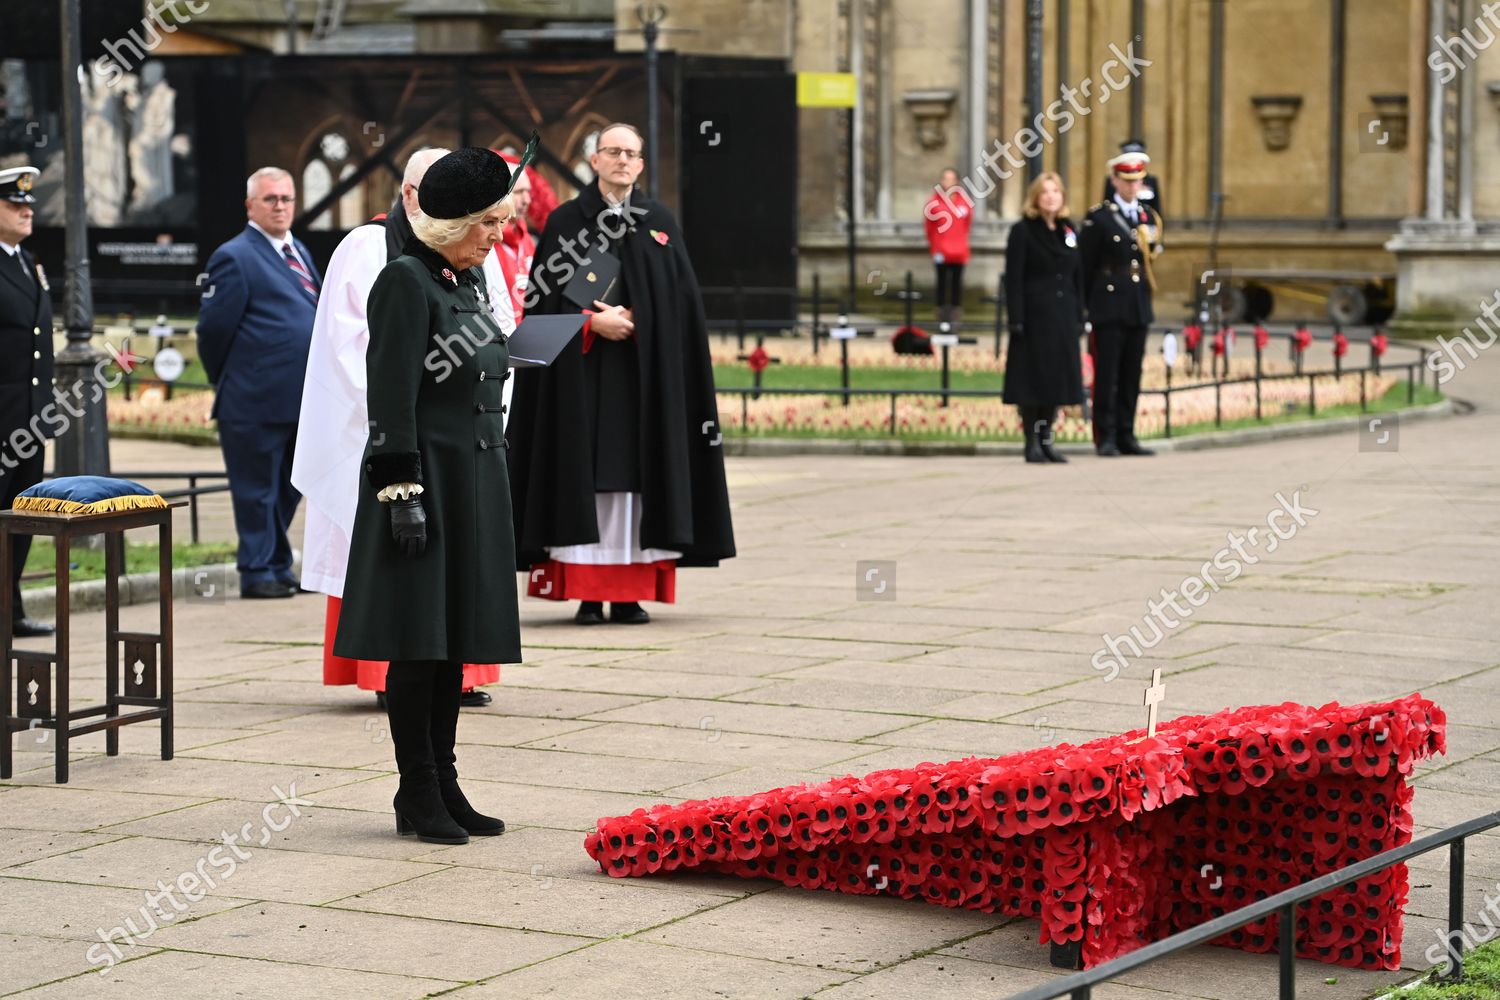 camilla-duchess-of-cornwall-attends-92nd-field-of-remembrance-at-westminster-abbey-london-uk-shutterstock-editorial-10995712k.jpg